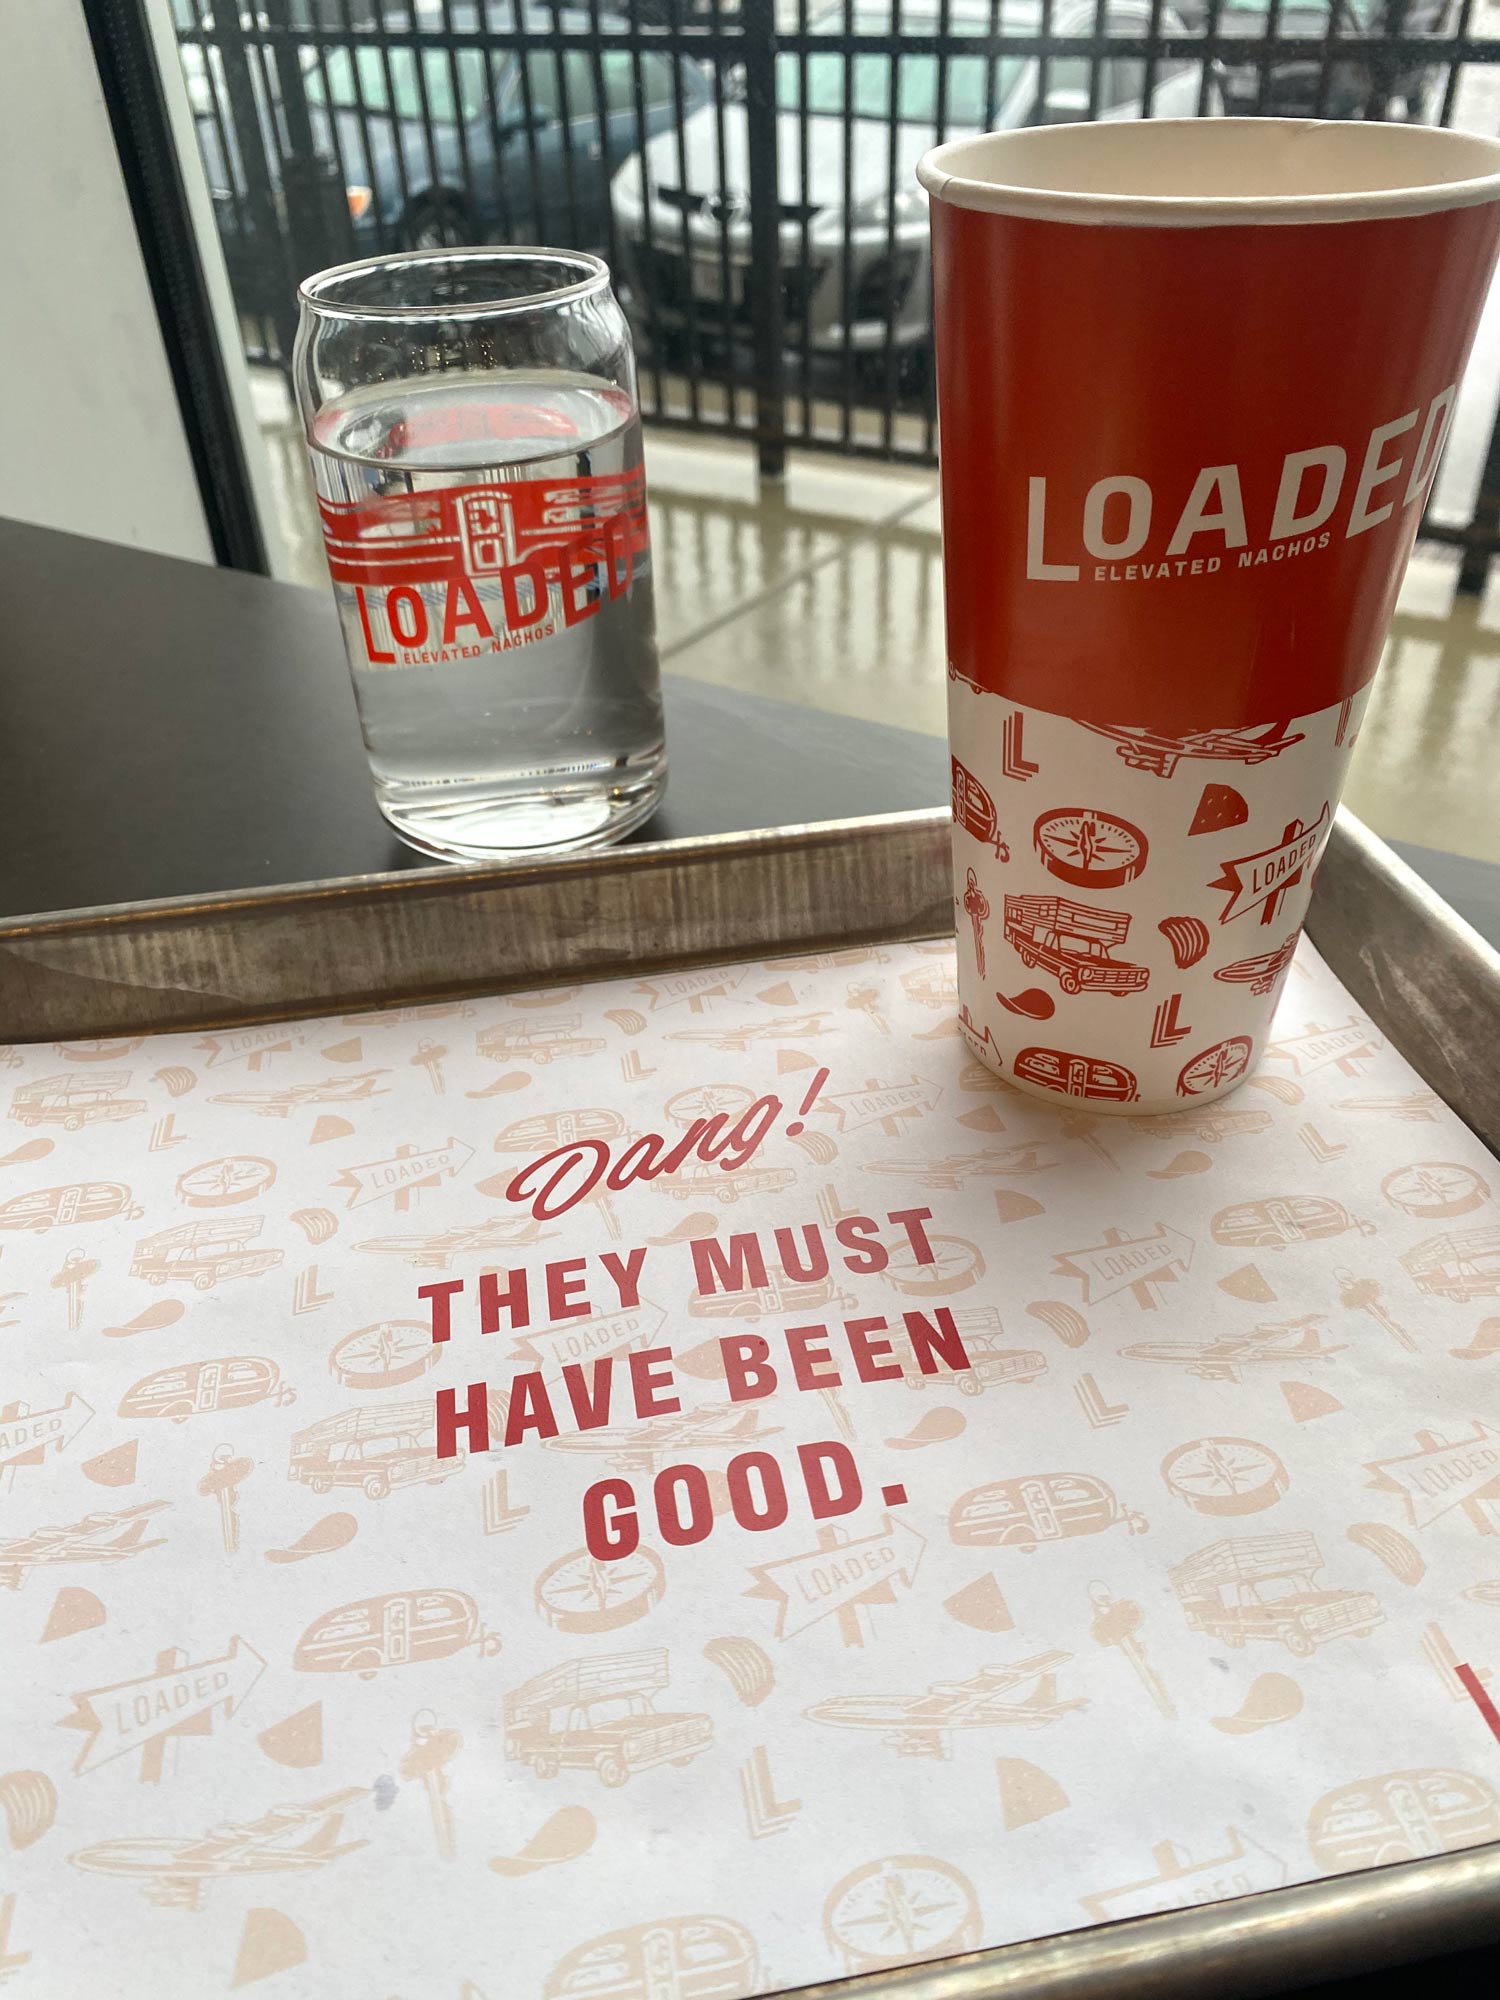 Tray paper that says "Dang! They must have been good," glass cups and paper cups as part of Loaded's fast-casual branding